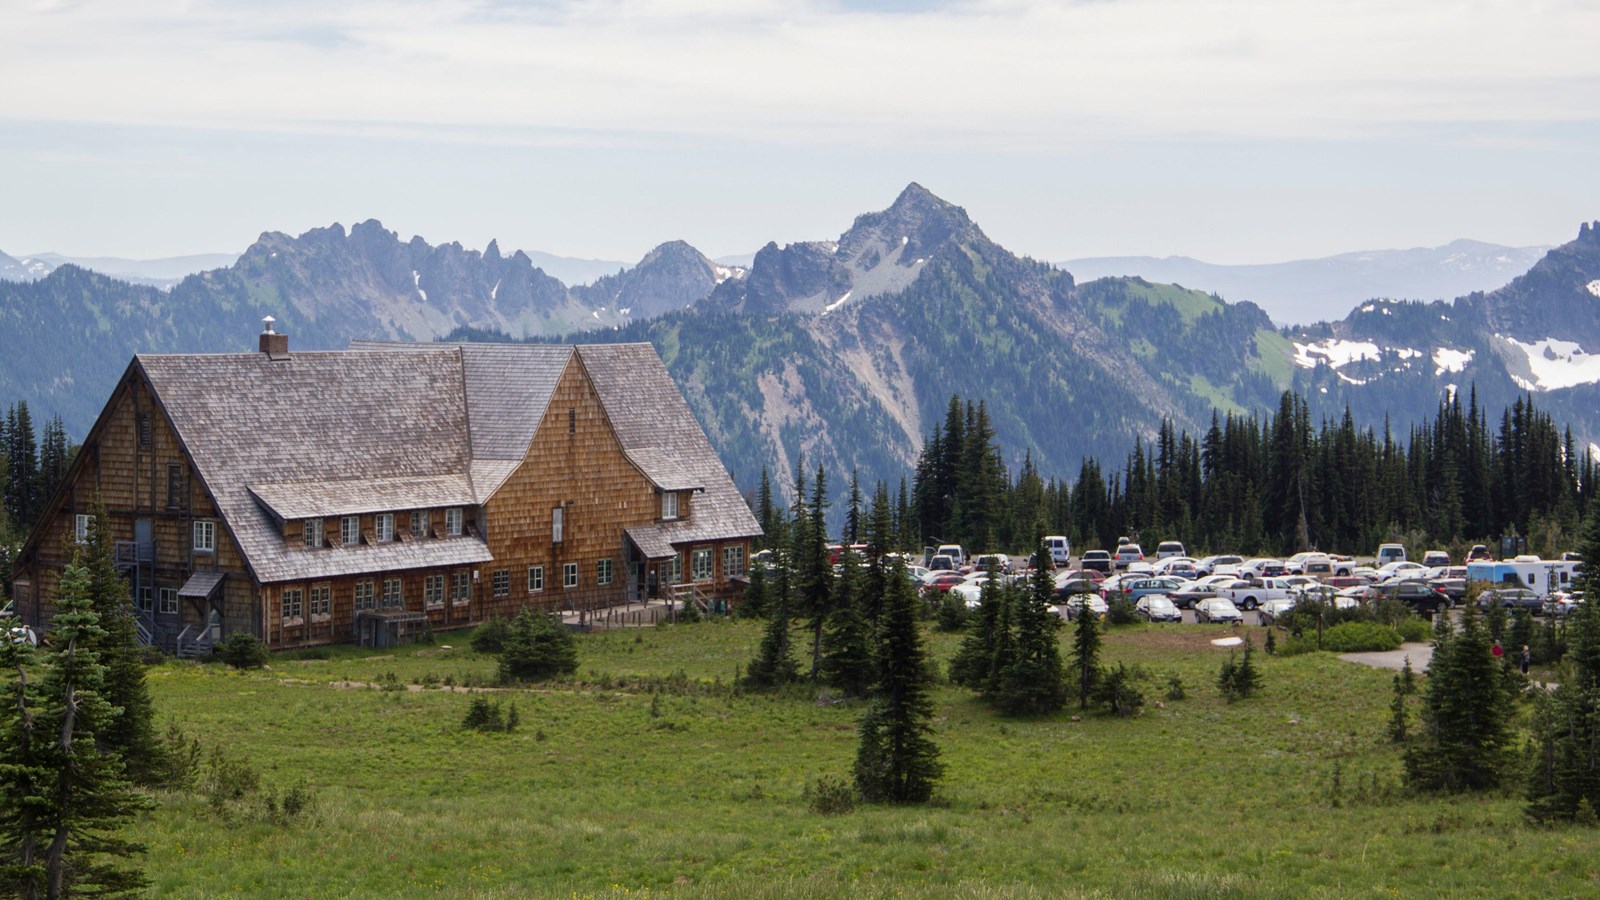 A large wood building with a shingle roof nestled in a mountain meadow next to a parking area.